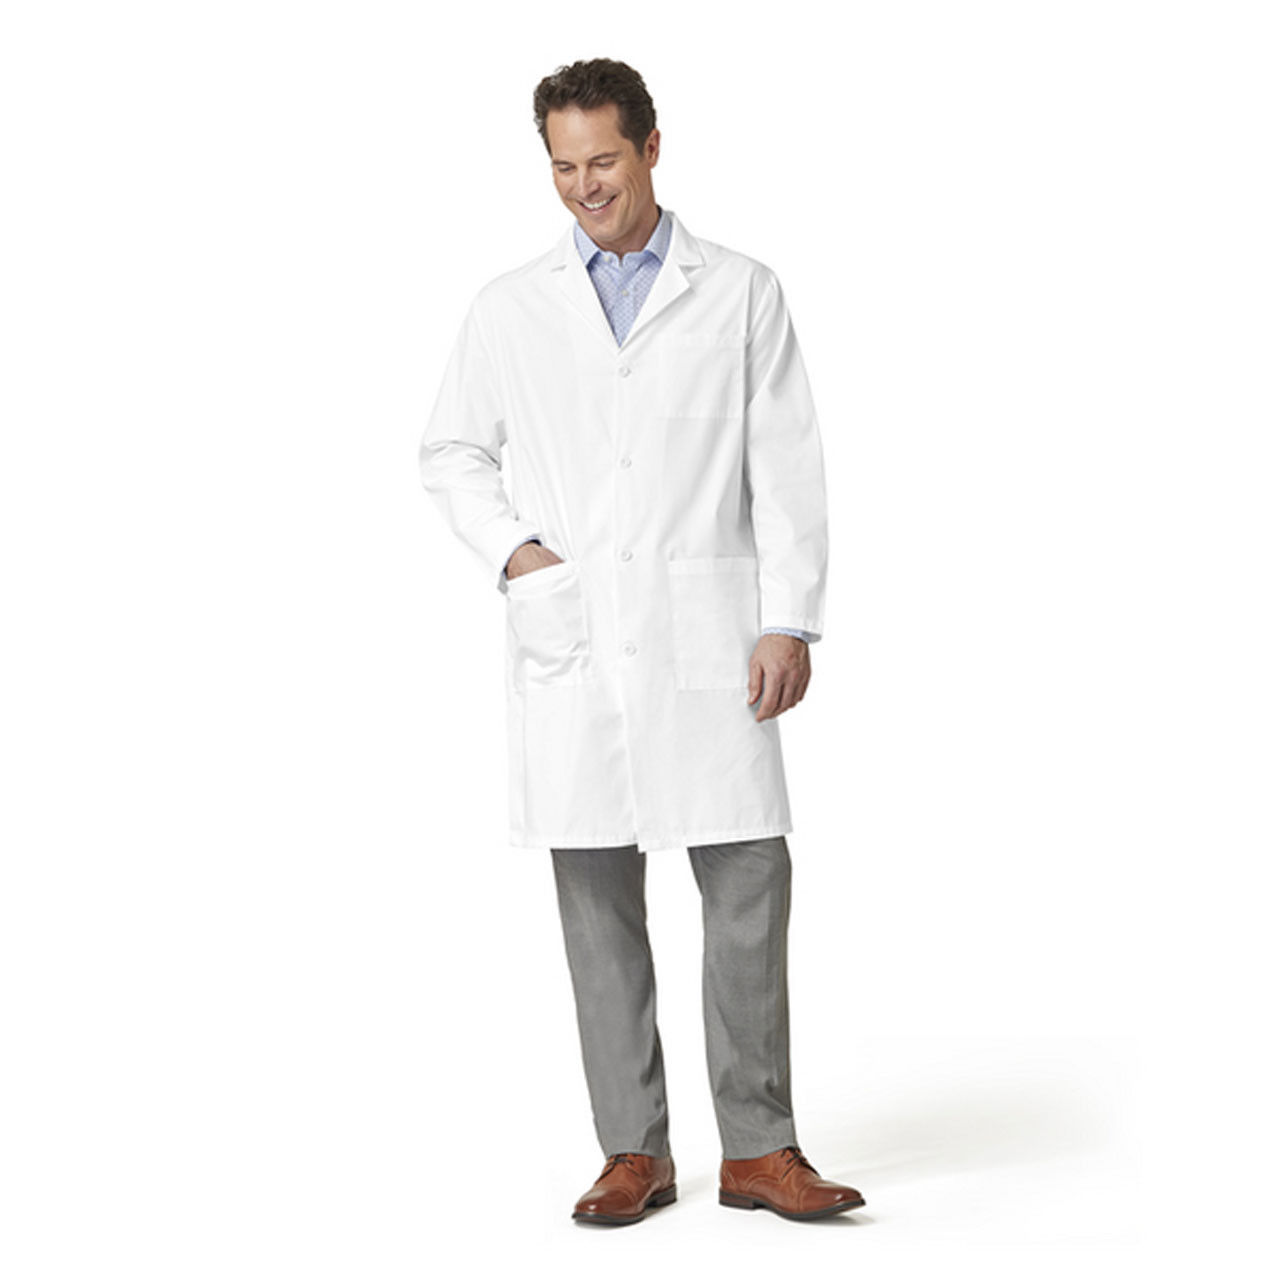 Before buying lab coats wholesale, what material is the Unisex Lab Coat by Fashion Seal made of?